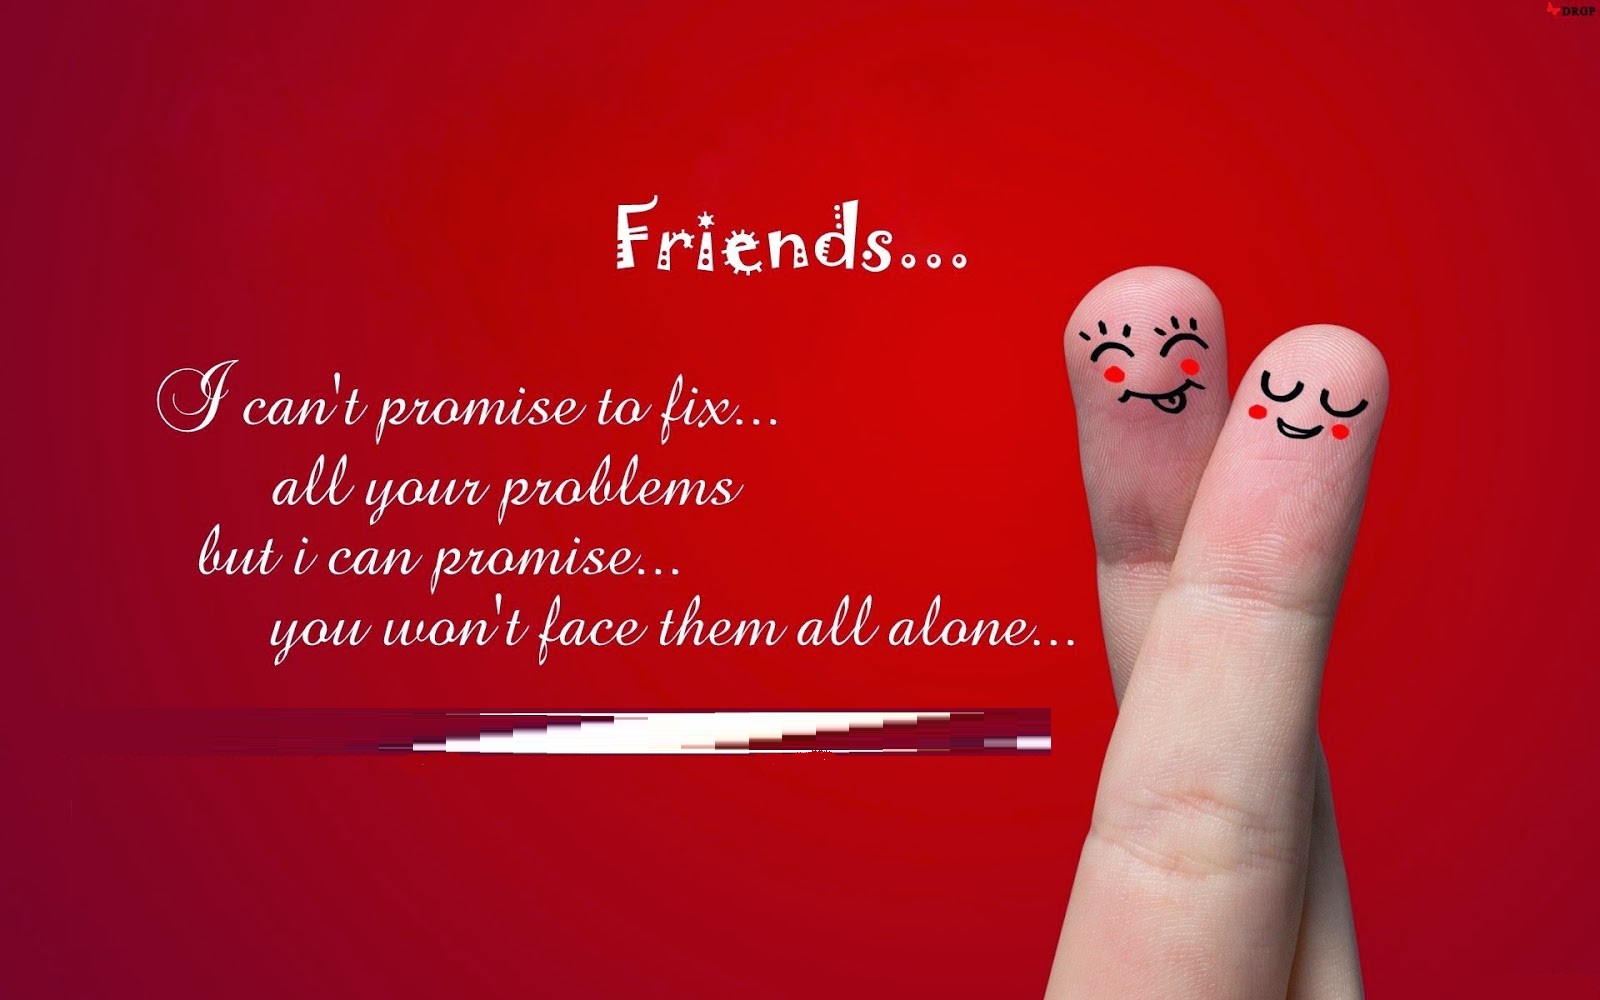 friendship wallpaper for whatsapp,finger,nail,facial expression,text,red